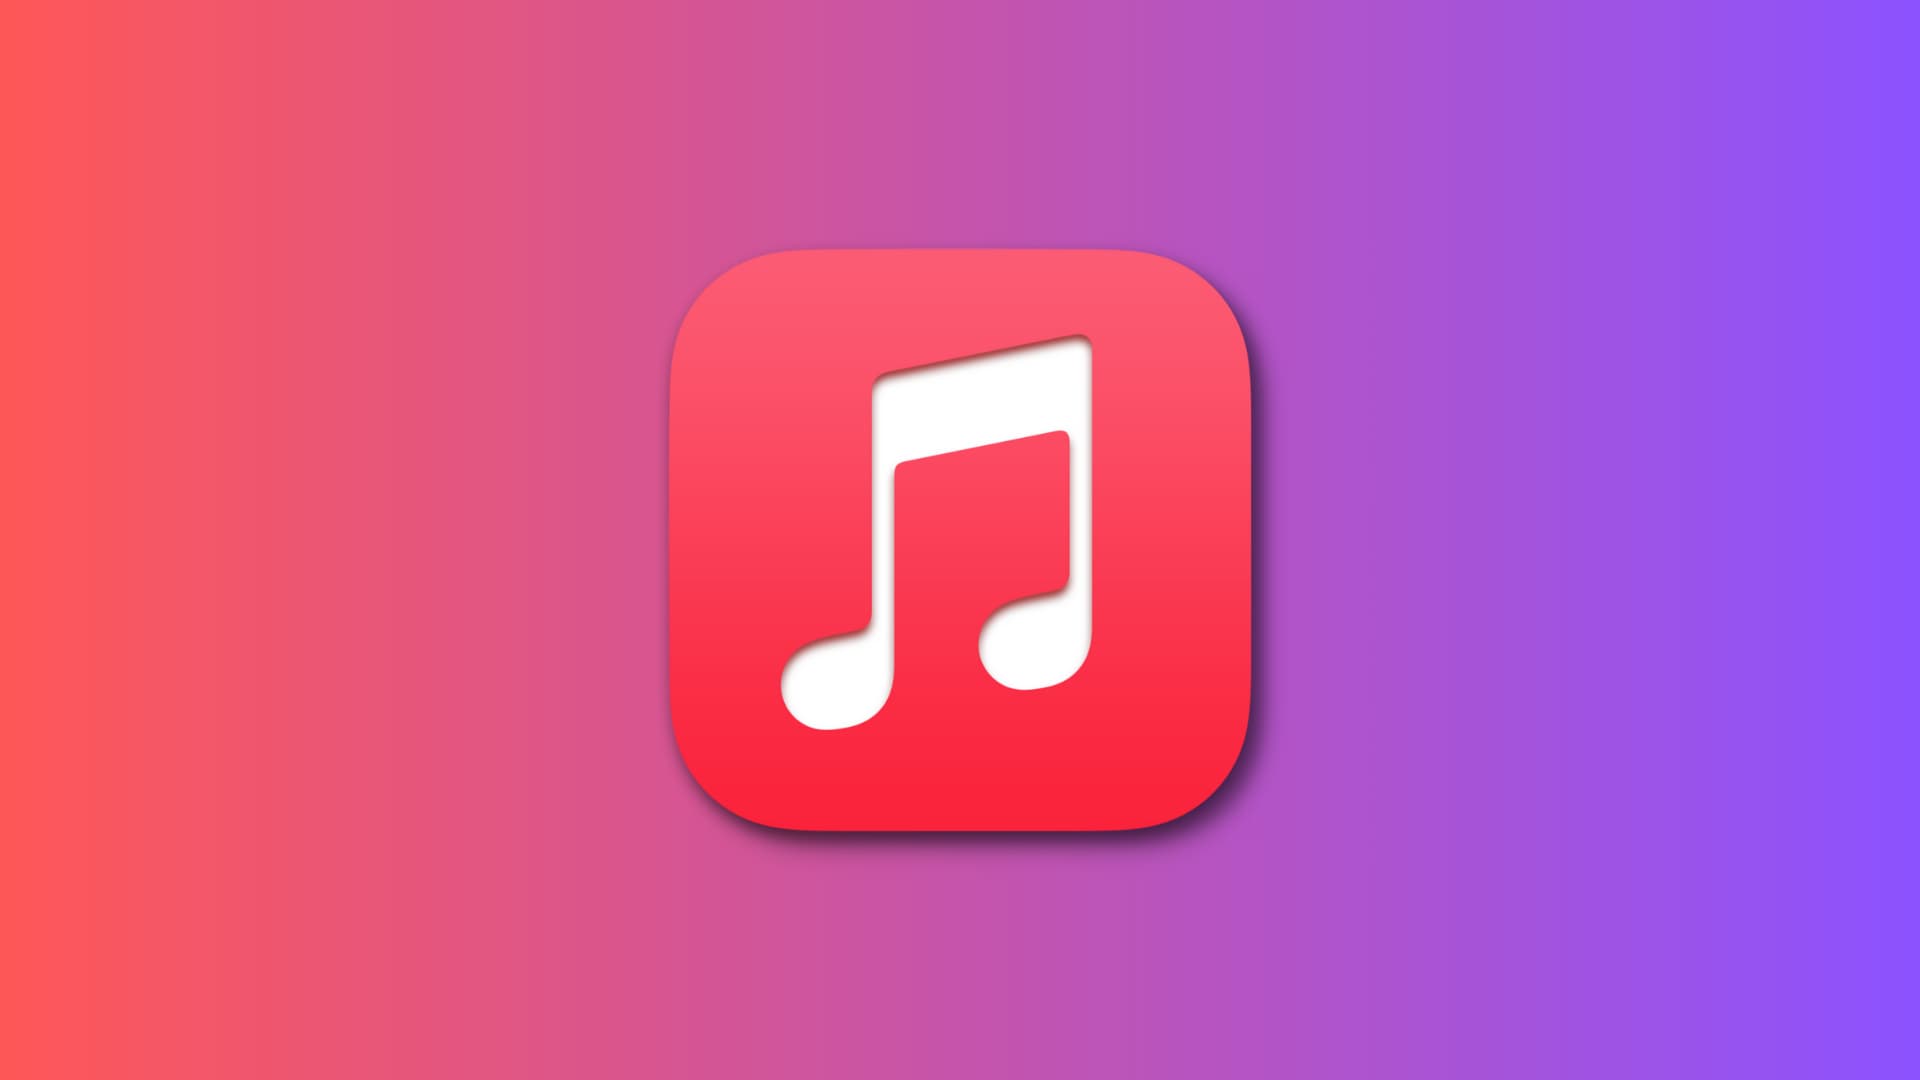 Apple Music app icon on a red and purple gradient background